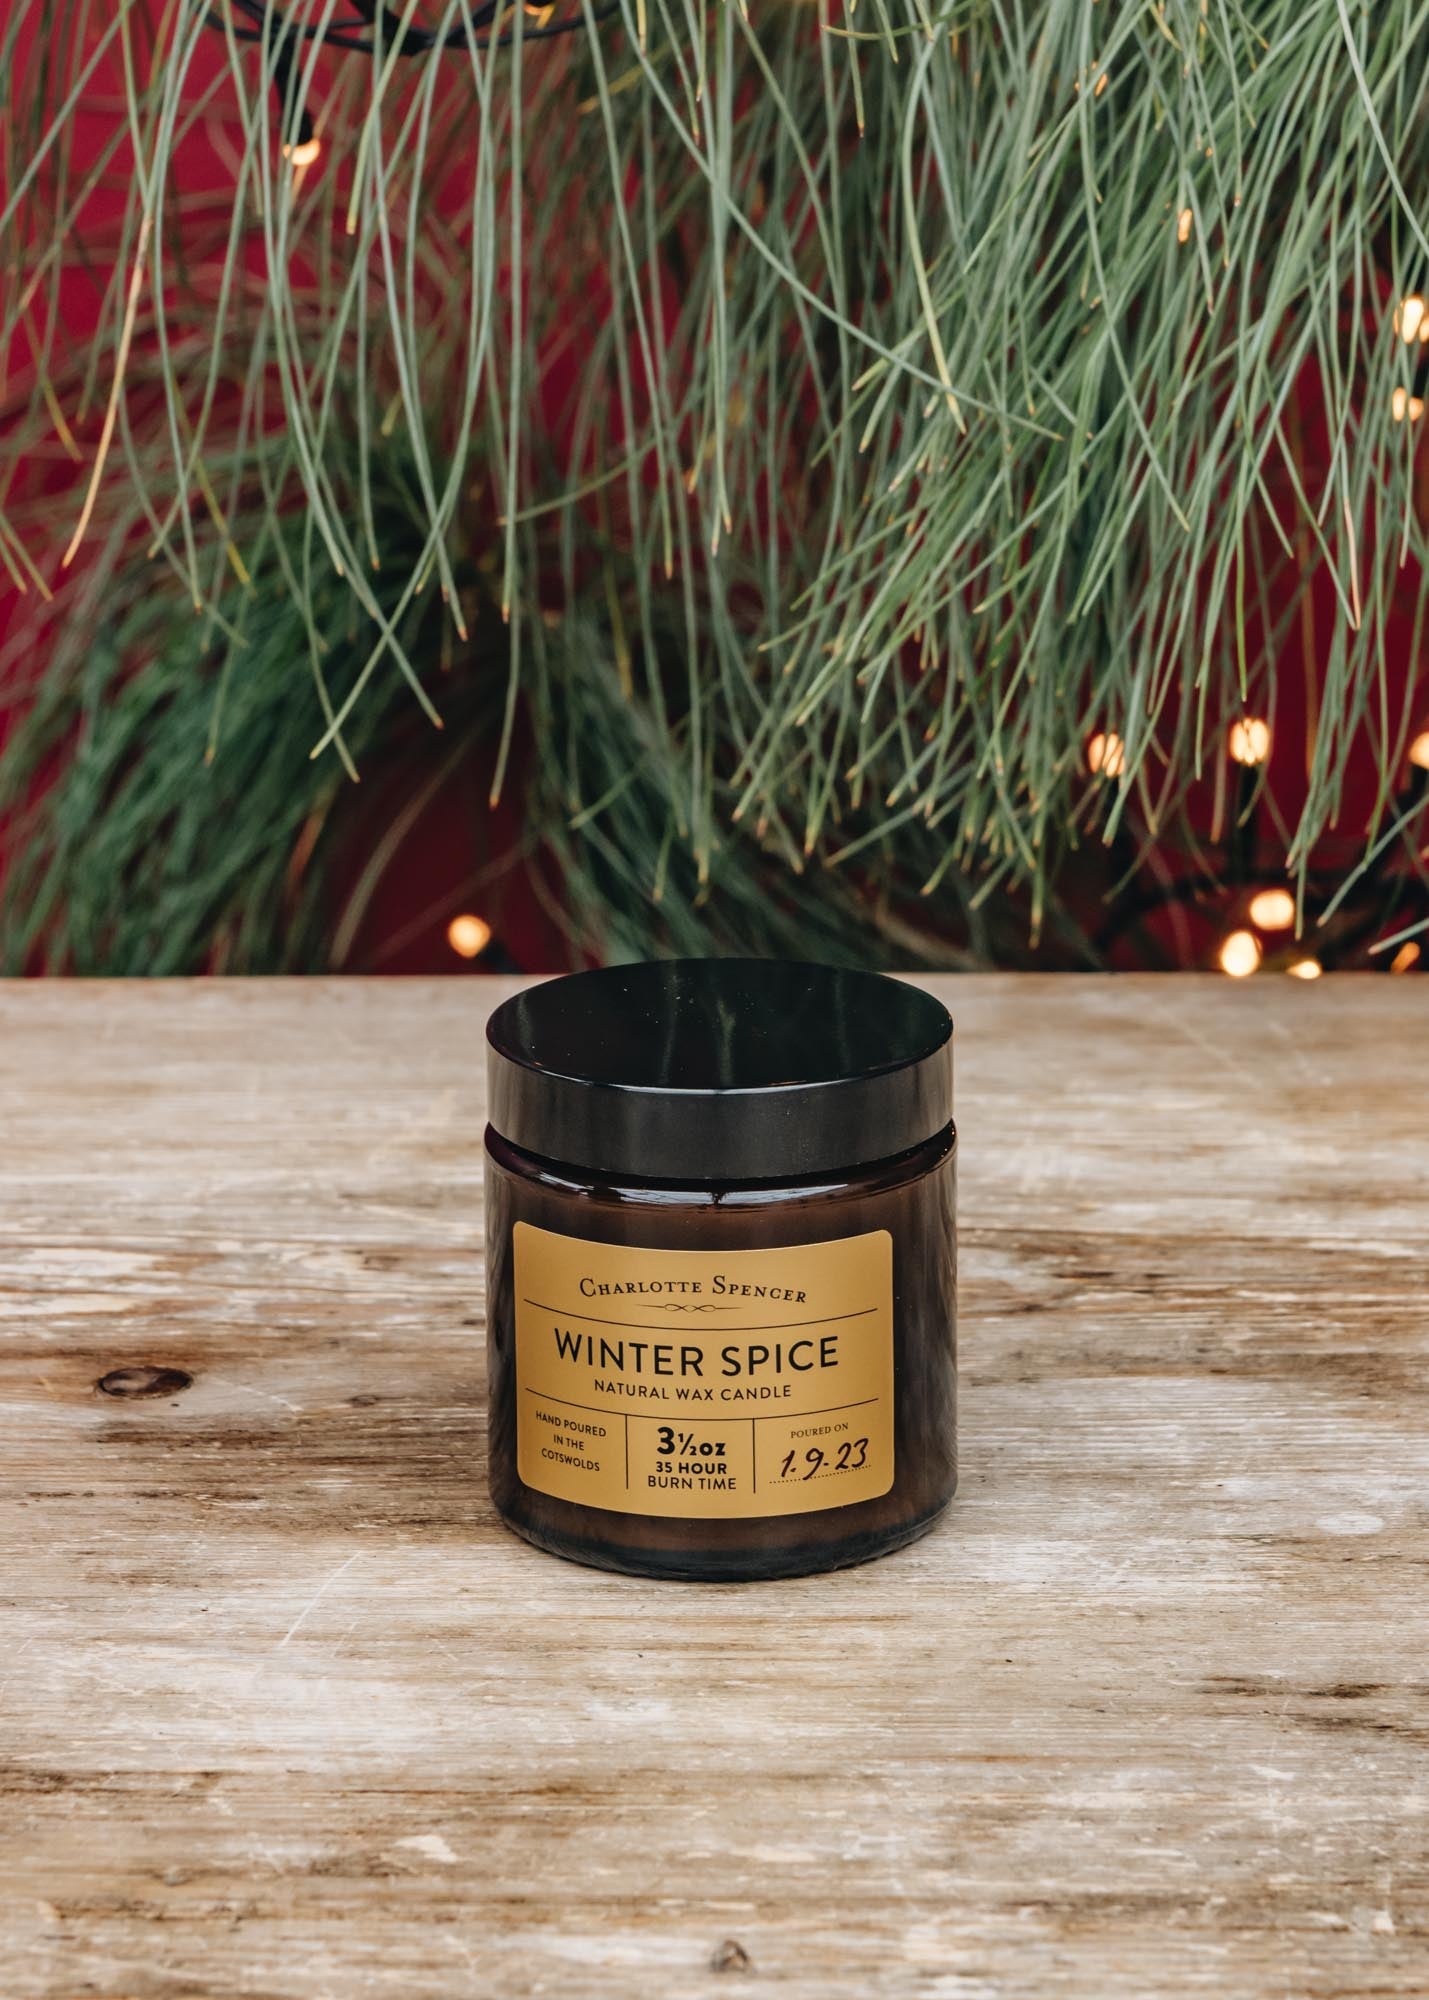 Charlotte Spencer Scented Candle in Winter Spice, 3.5oz